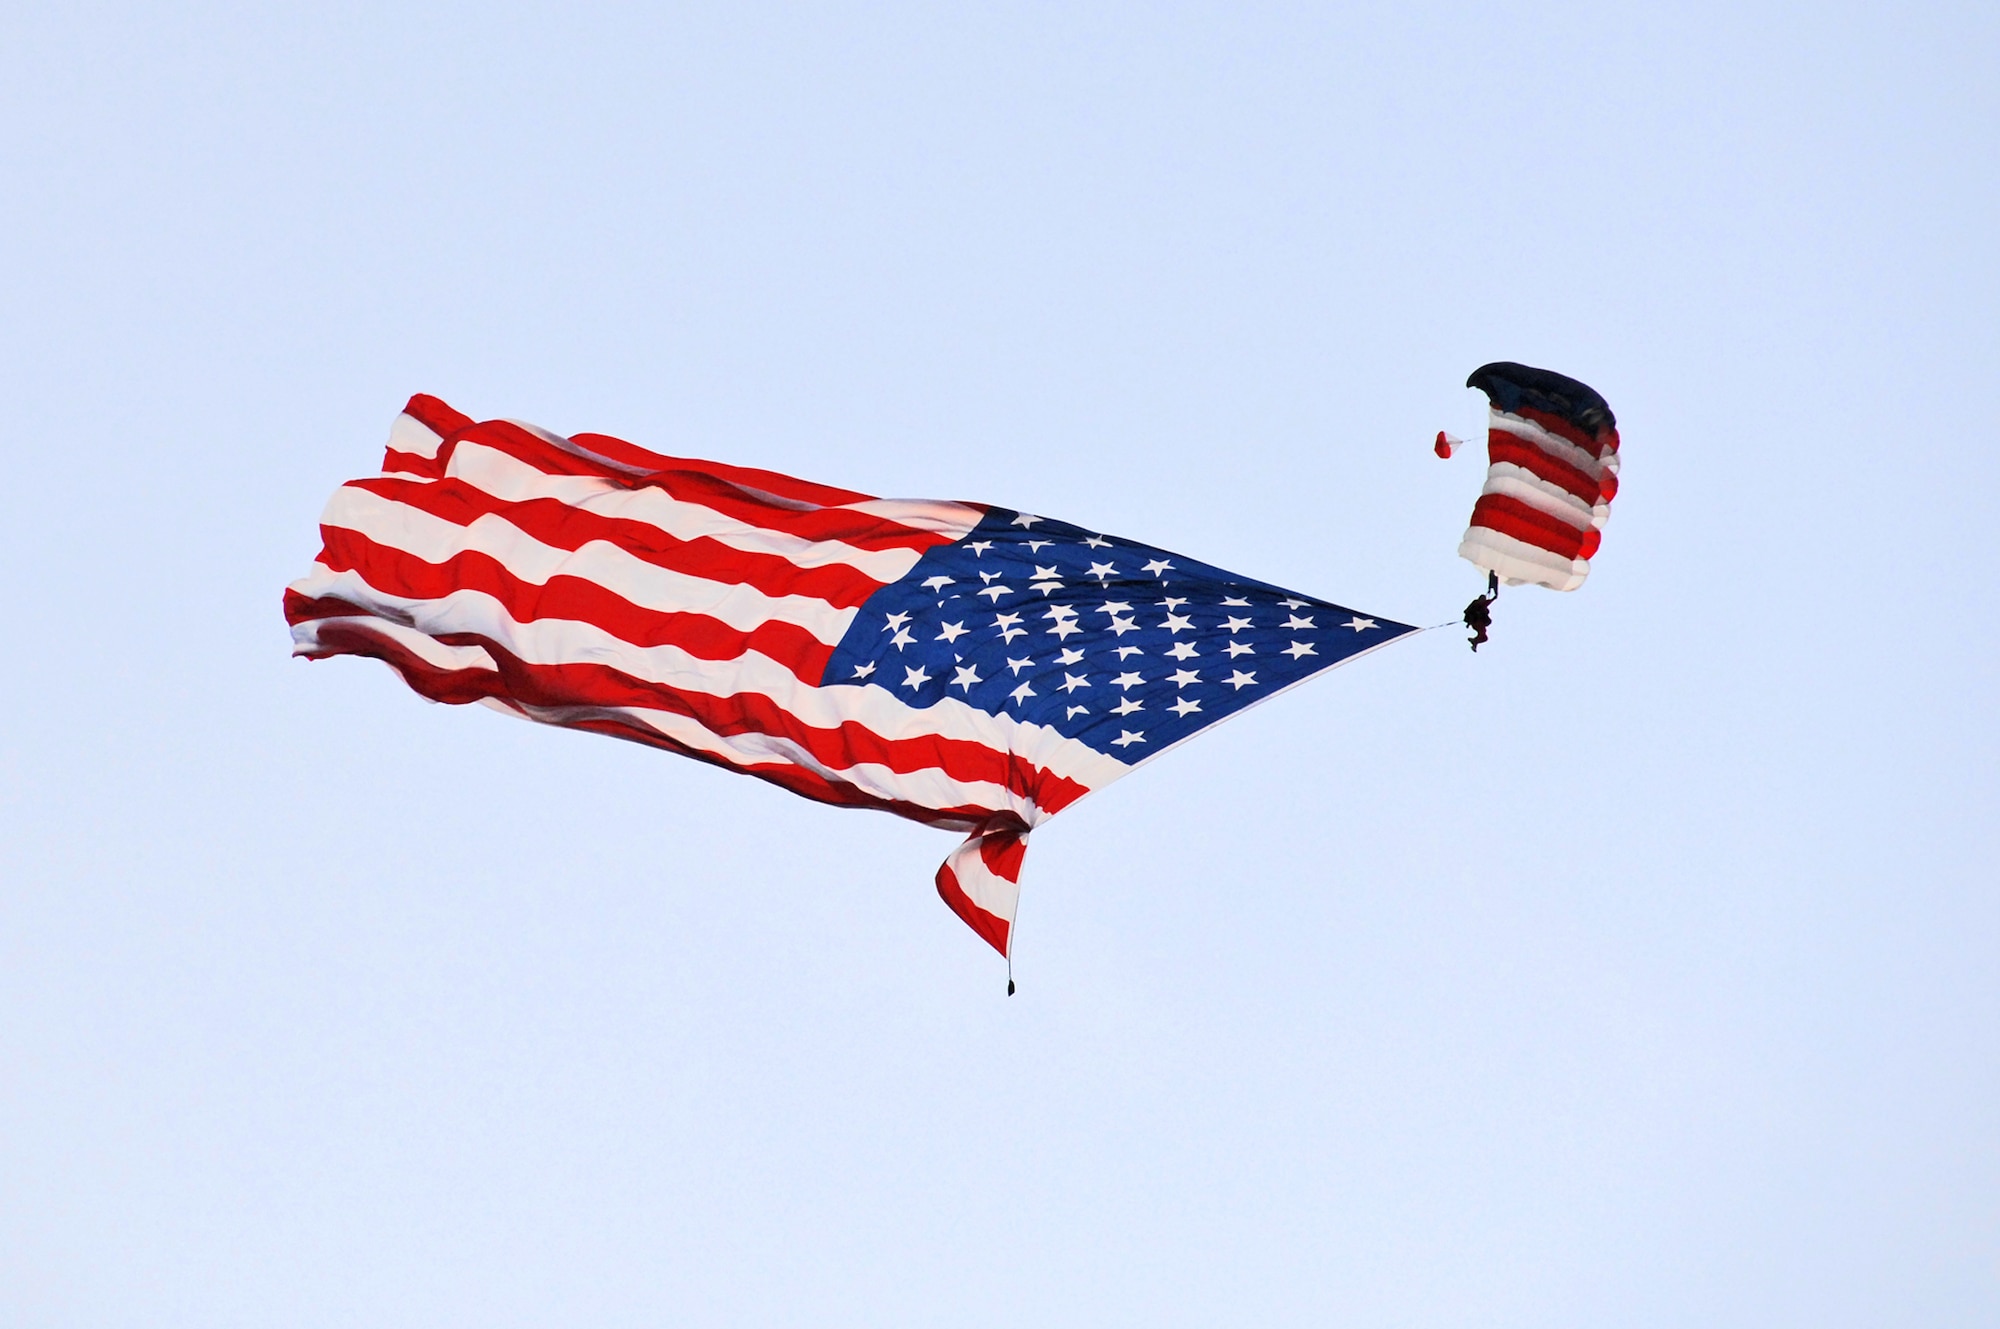 Paul McCowen of Cincinnati parachutes in the American Flag during opening ceremonies for the U.S. Air Force Marathon Sept. 19, 2009 at Wright-Patterson Air Force Base, Ohio. A record of nearly 10,000 runners participated. (Air Force photo/Ben Strasser)